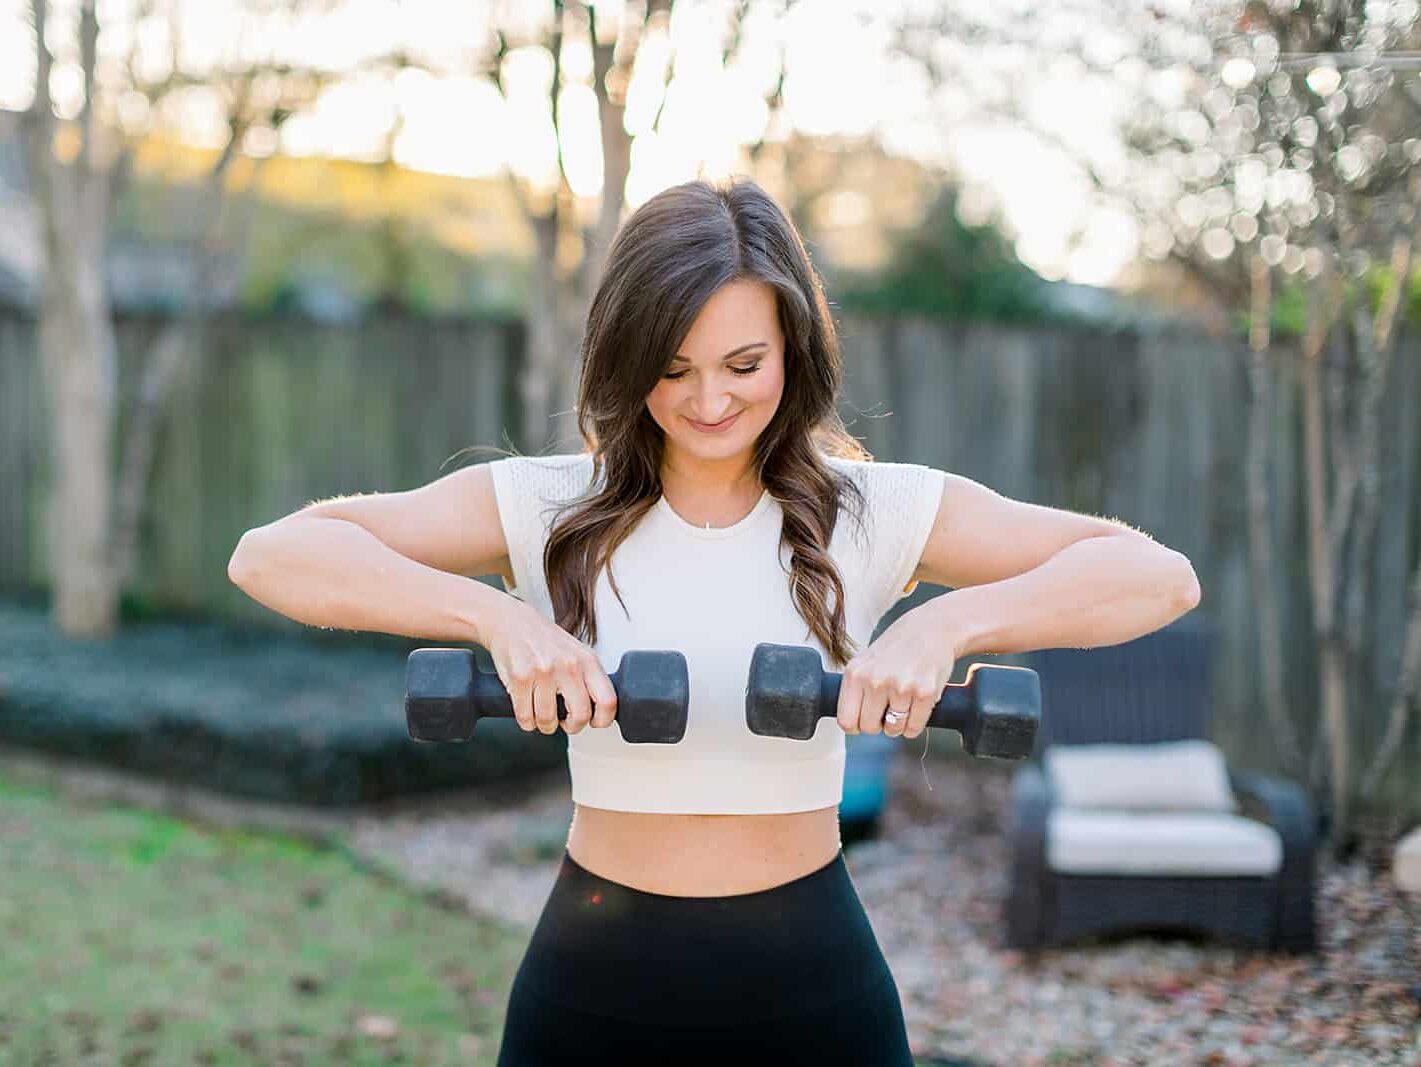 female with brown hair wearing white shirt lifting a dumbbell in each hand